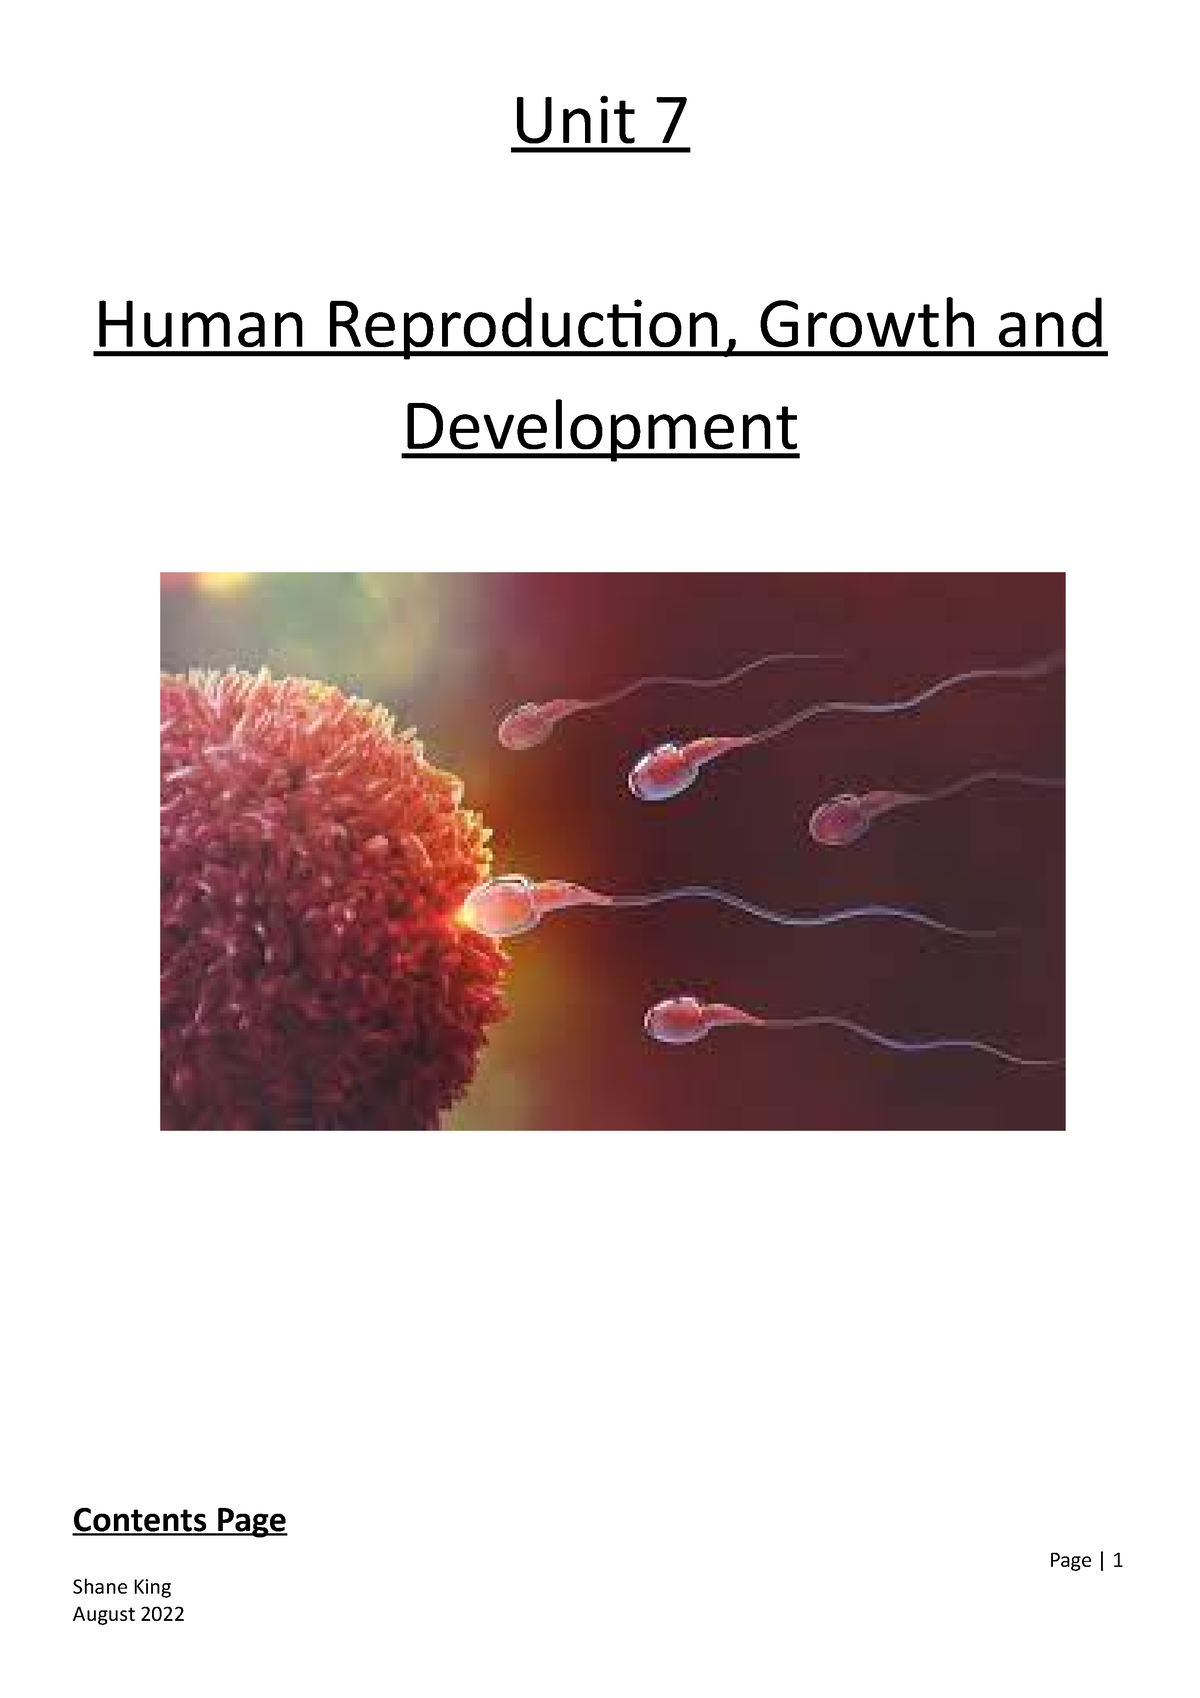 Human Reproduction Growth And Development Unit Unit Human Reproduction Growth And